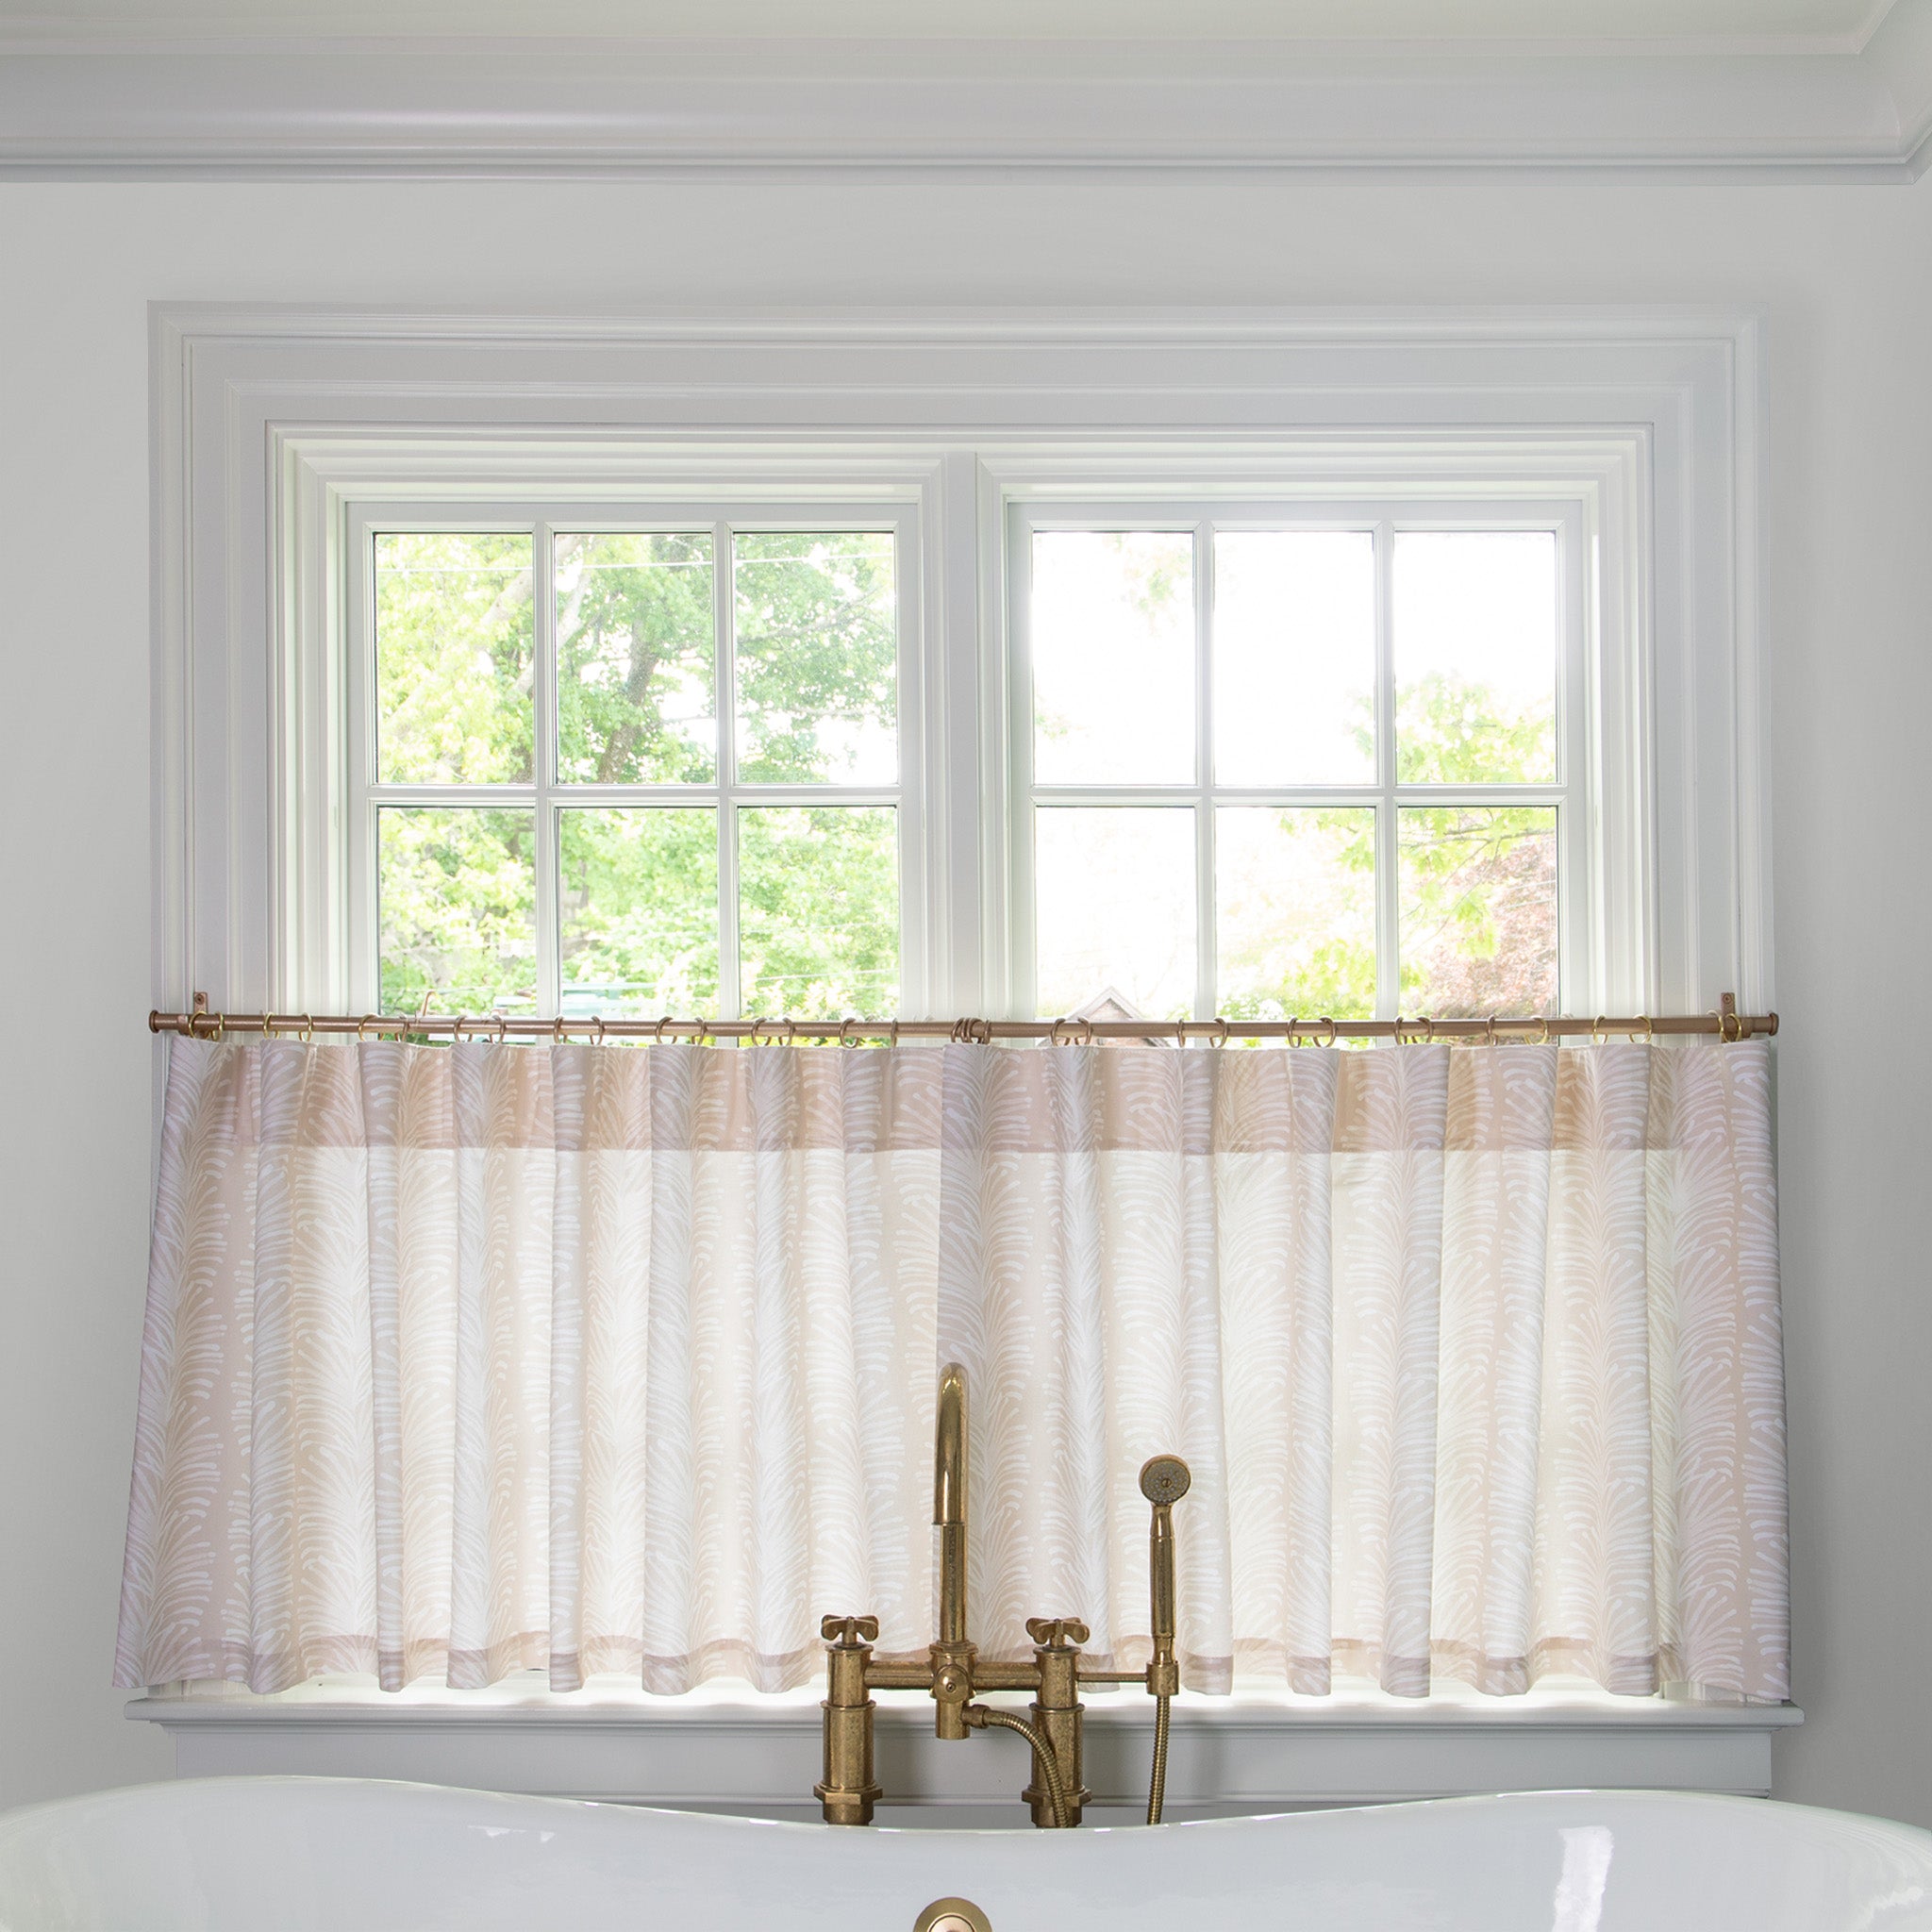 Beige Botanical Stripe Printed Cotton fabric curtain on a metal rod in front of an illuminated window in a bathroom 